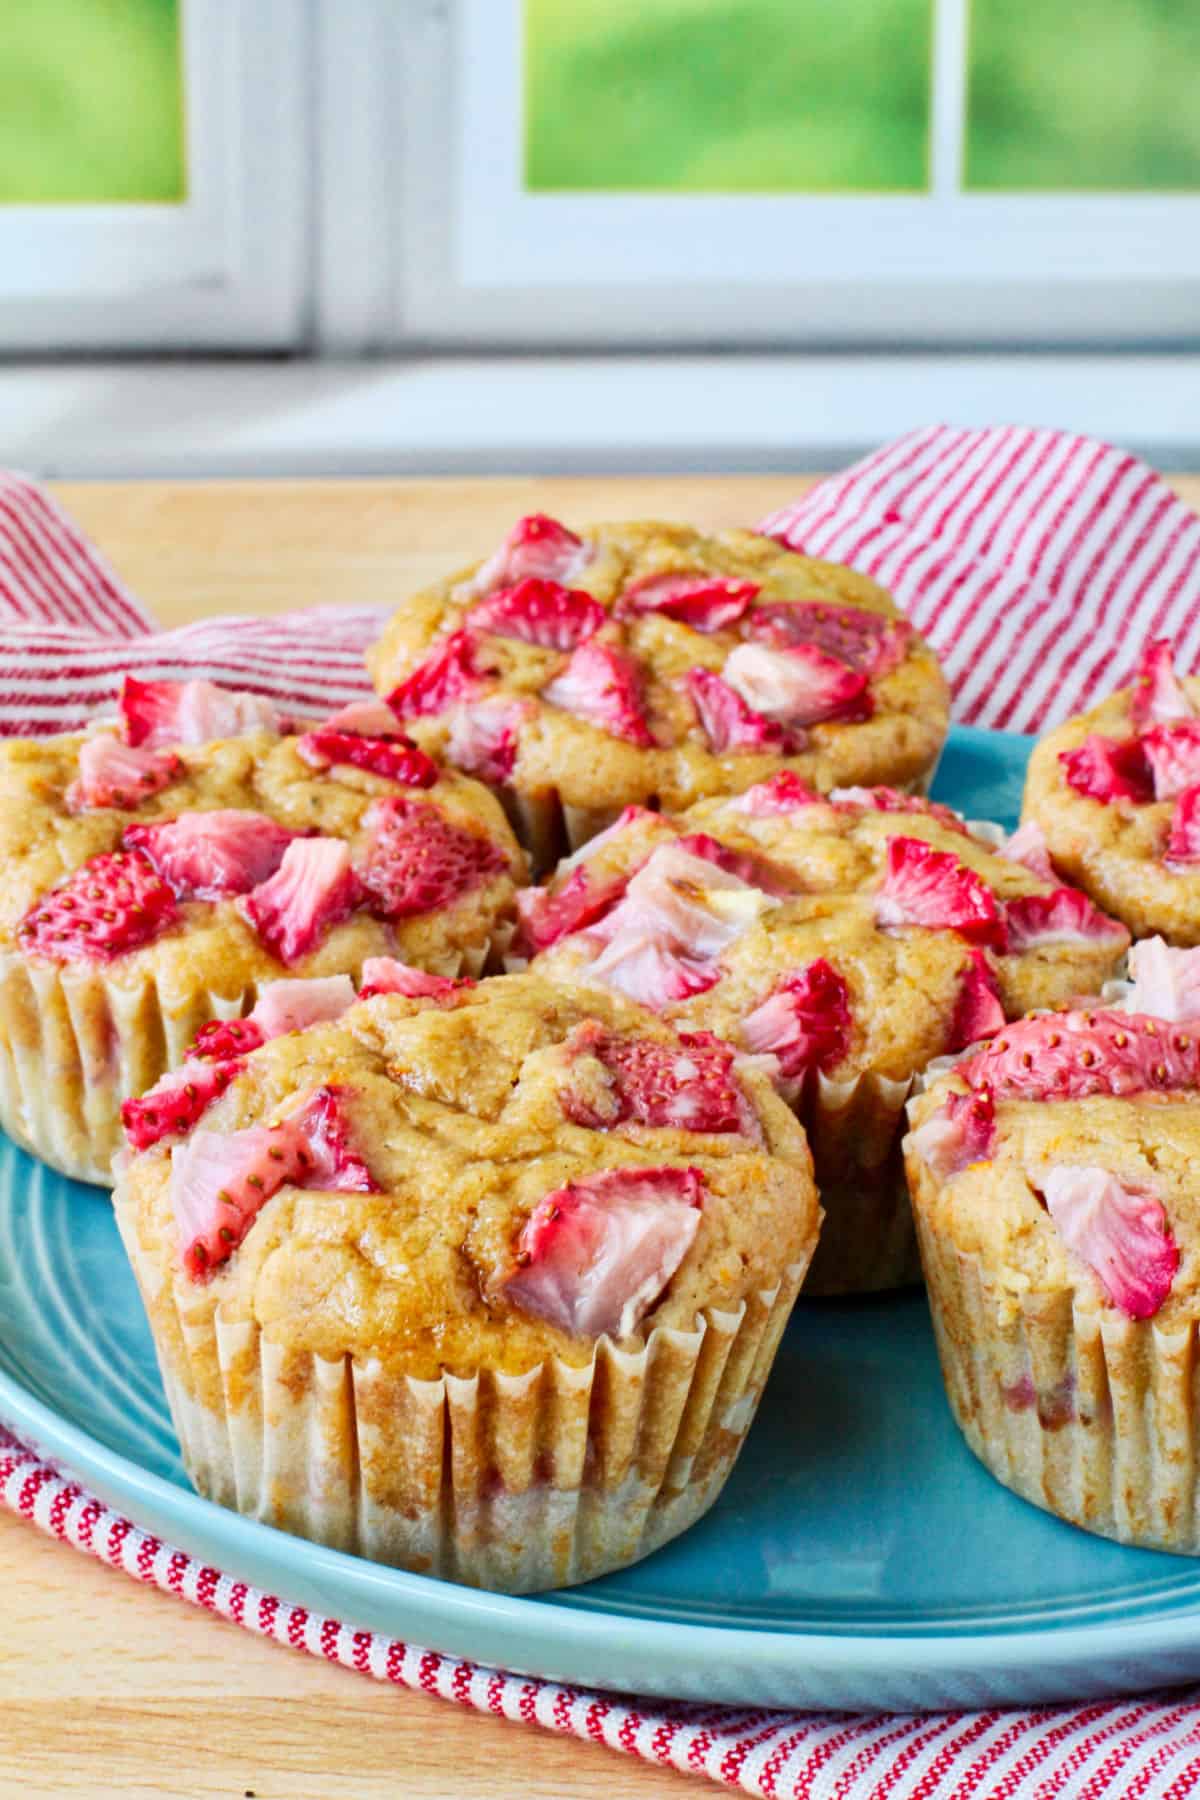 Orange and Strawberry Whole Wheat Muffins on a blue plate.